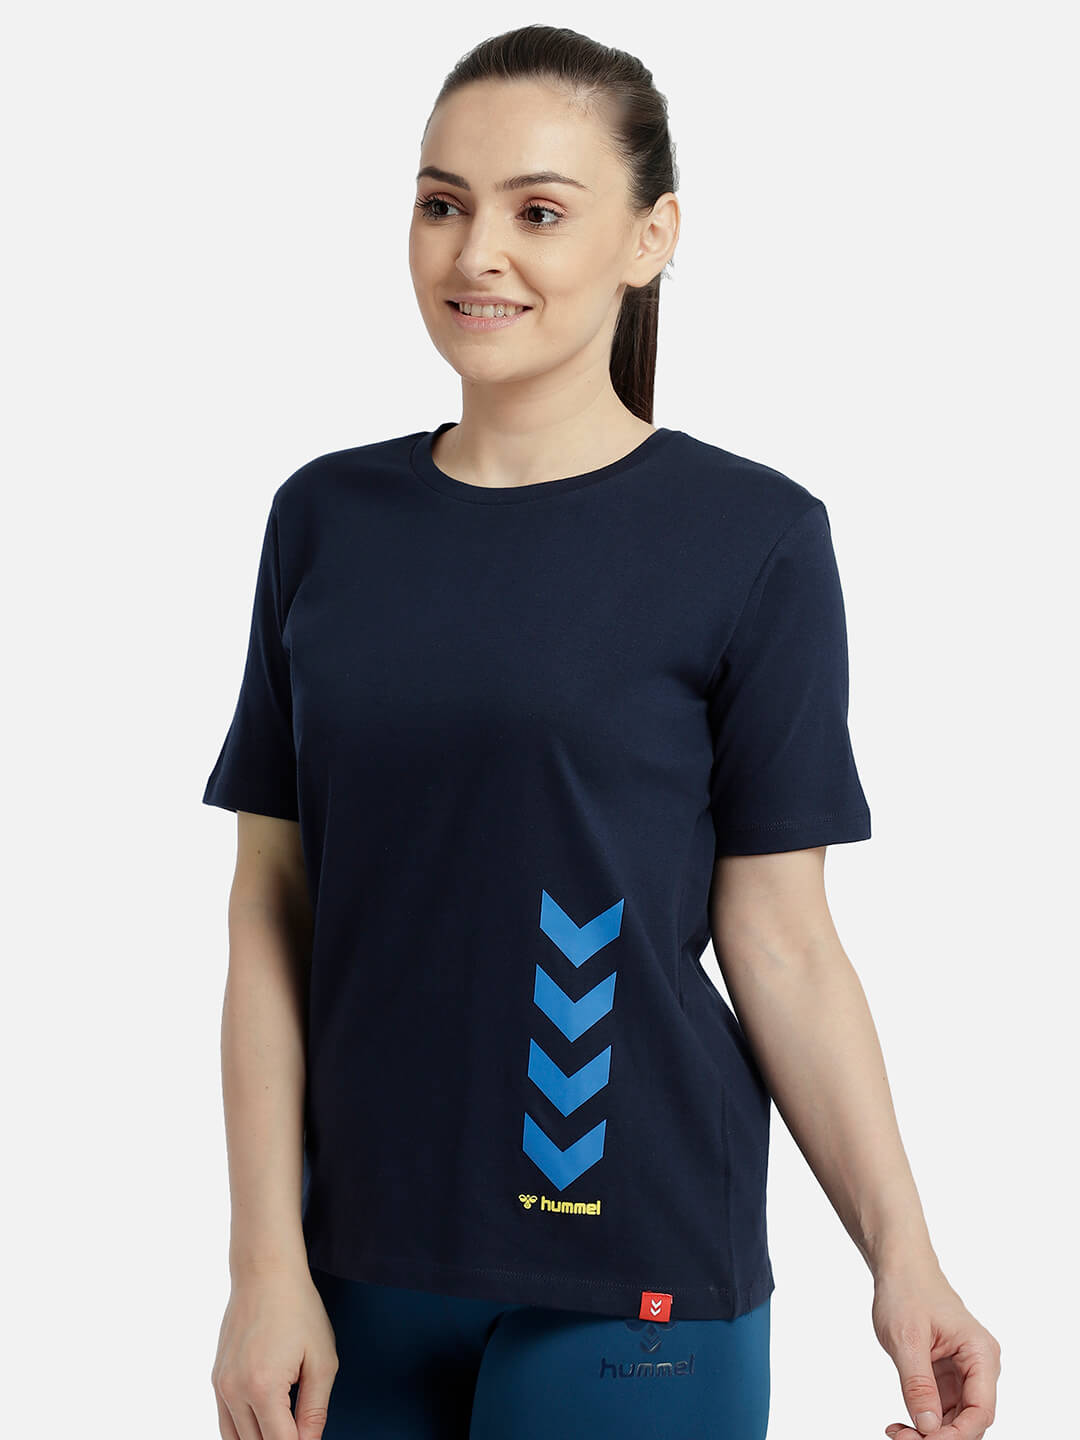 Tany Round Neck Blue T-Shirt for Women